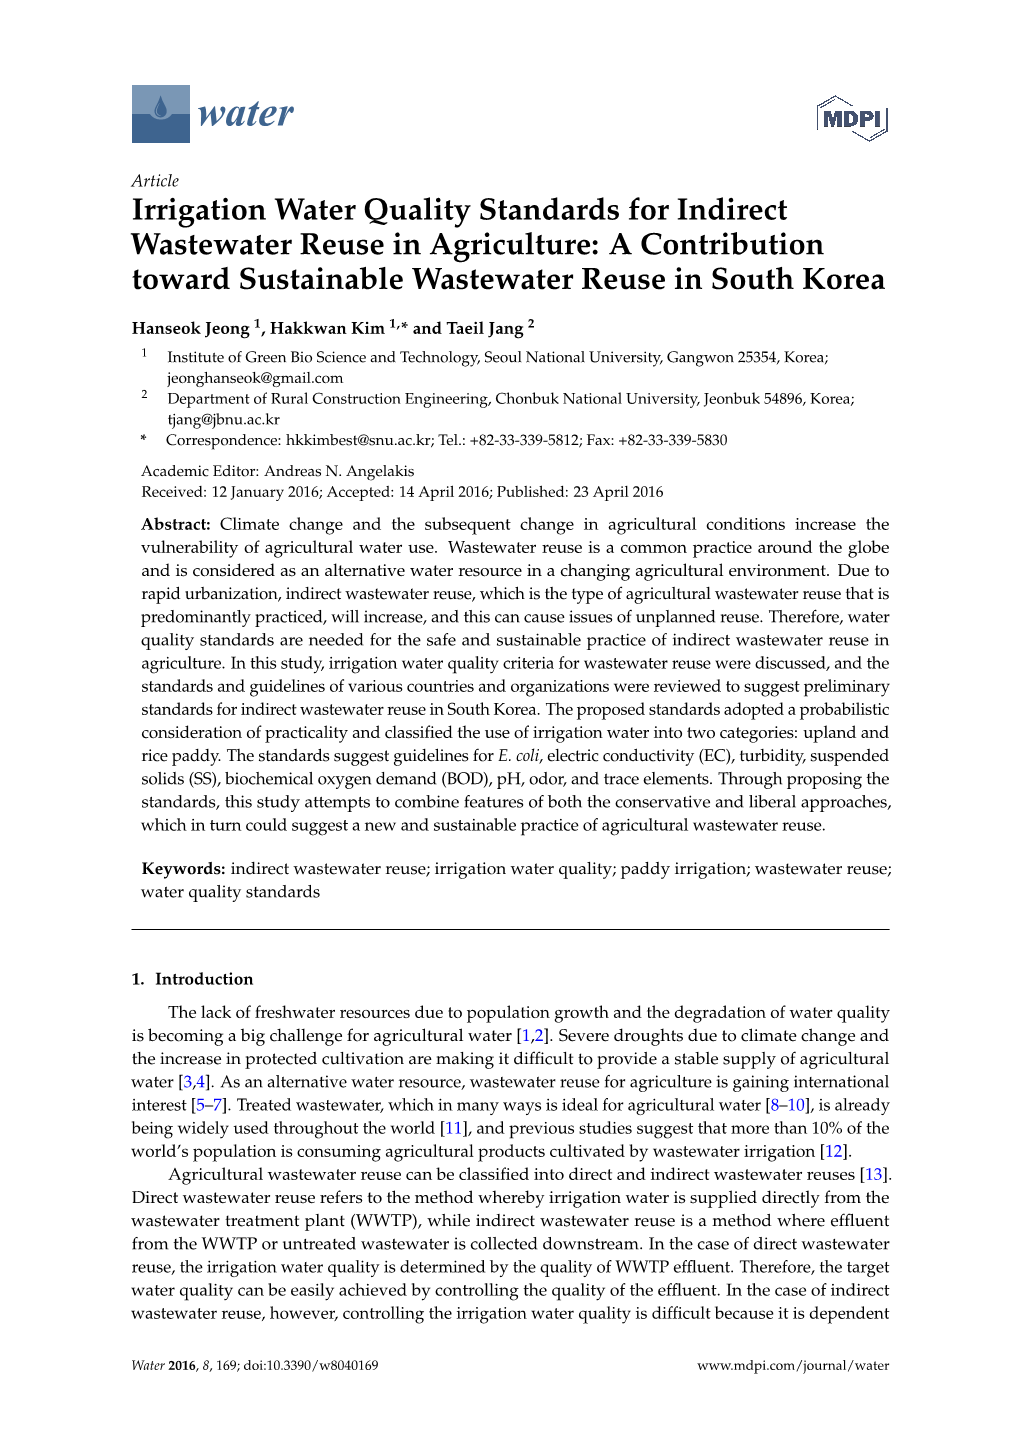 Irrigation Water Quality Standards for Indirect Wastewater Reuse in Agriculture: a Contribution Toward Sustainable Wastewater Reuse in South Korea